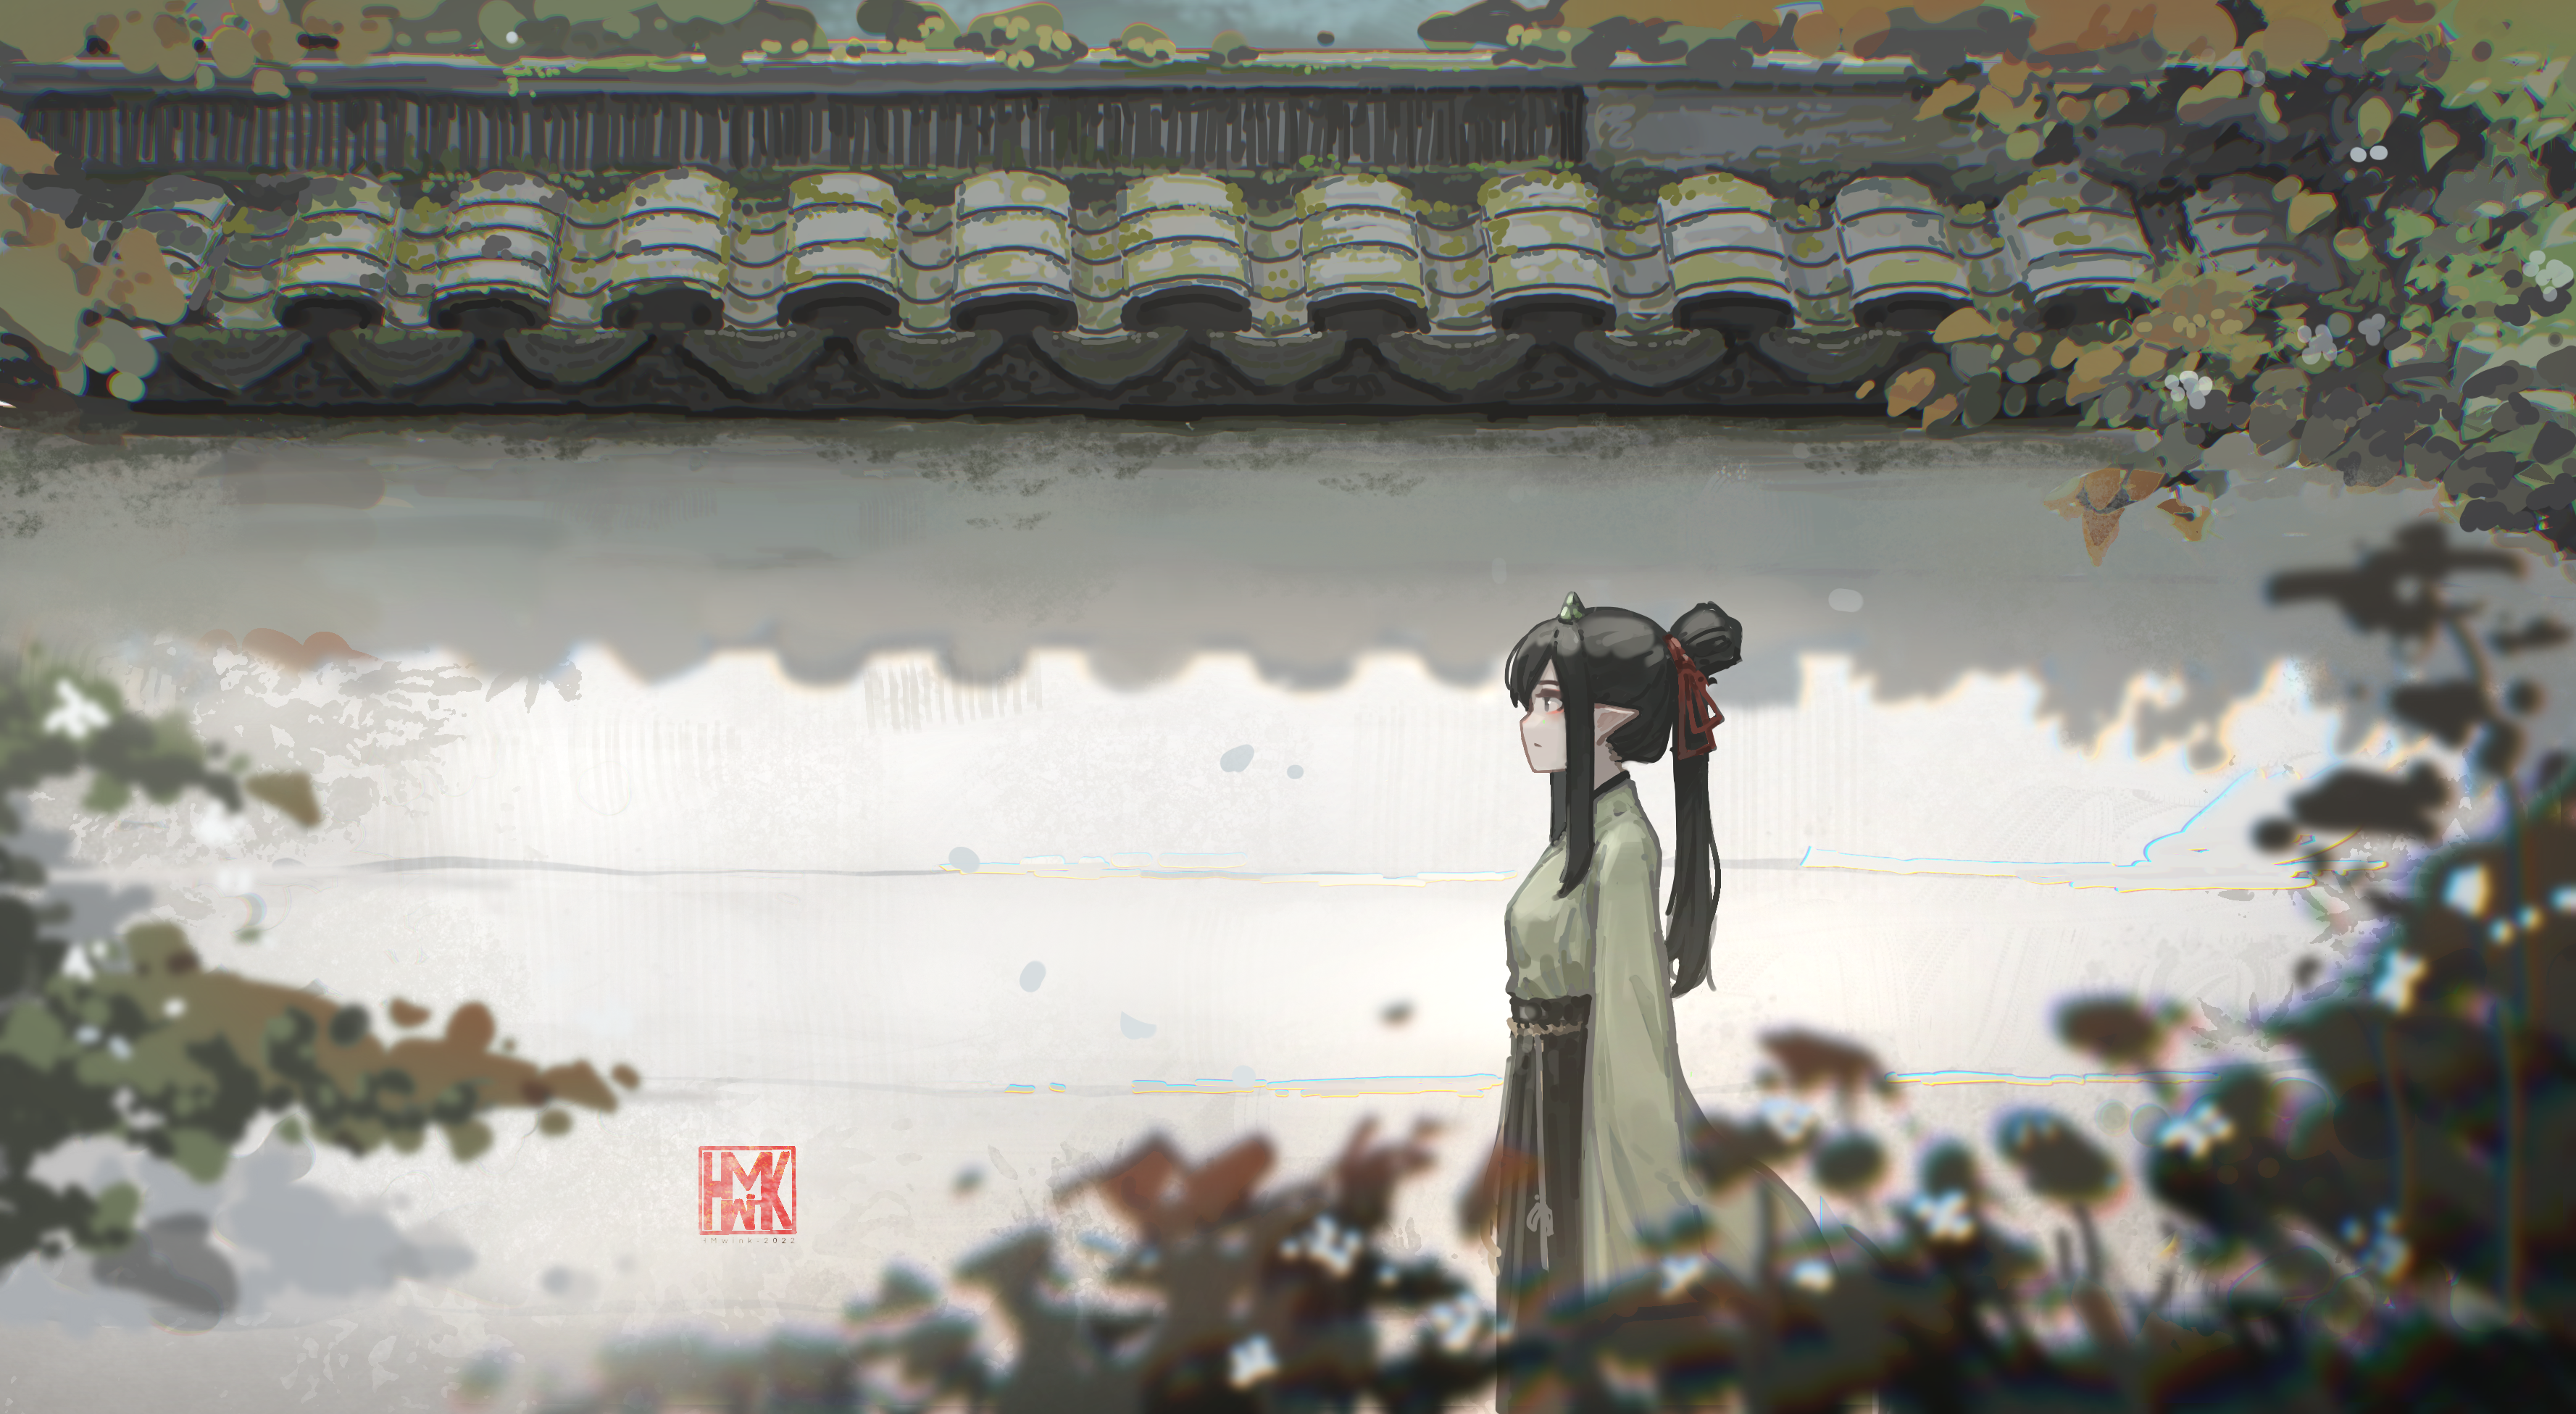 Anime 3555x1952 Hua Ming wink original characters chinese clothing wall Chinese architecture anime girls pointy ears Yun Xi